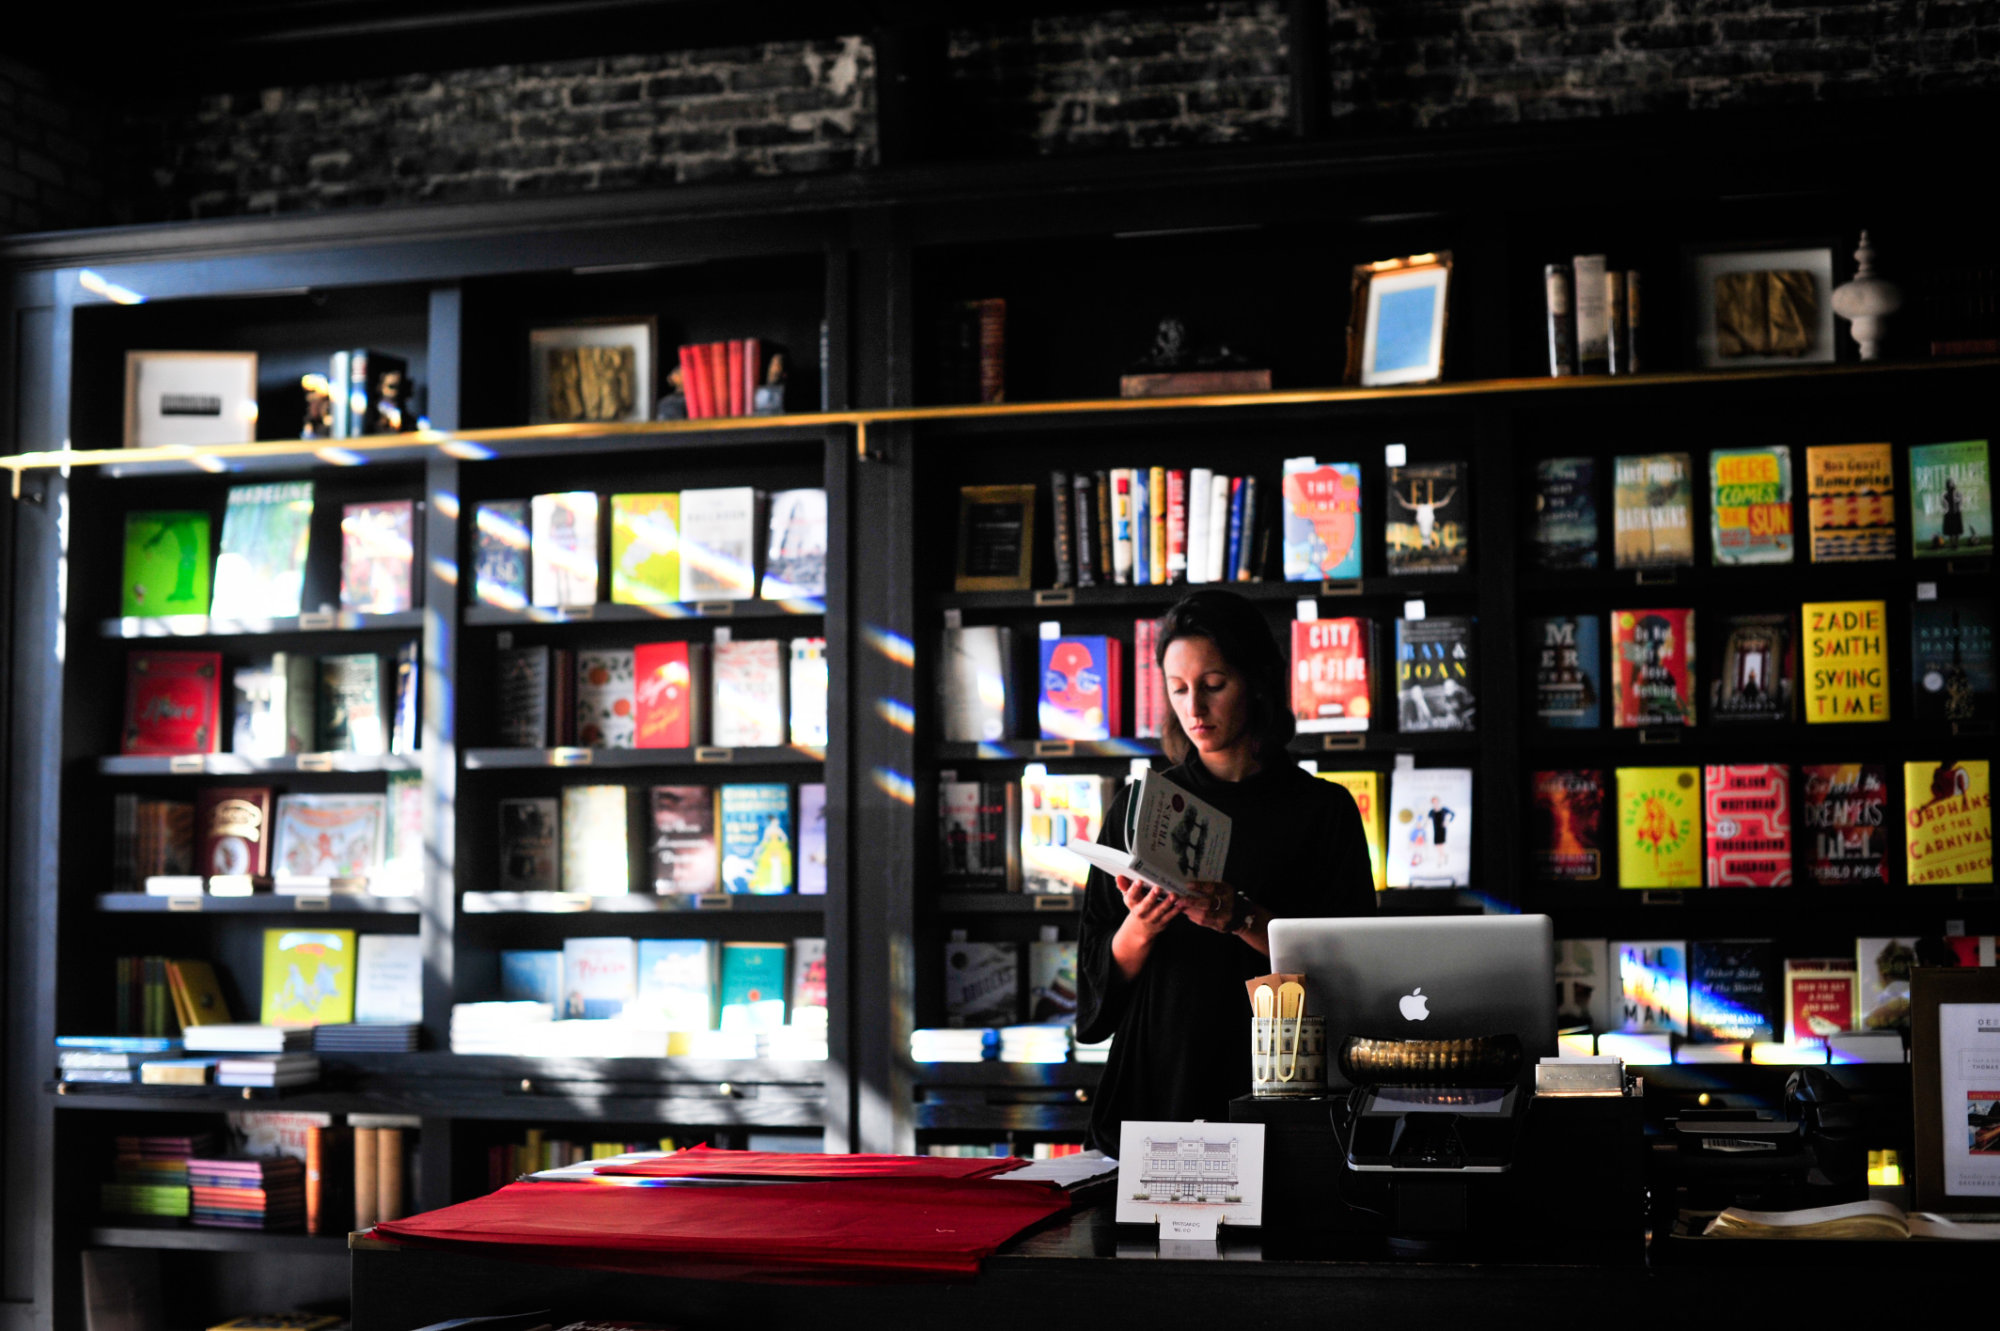 A person stands behind the counter of a bookshop reading.